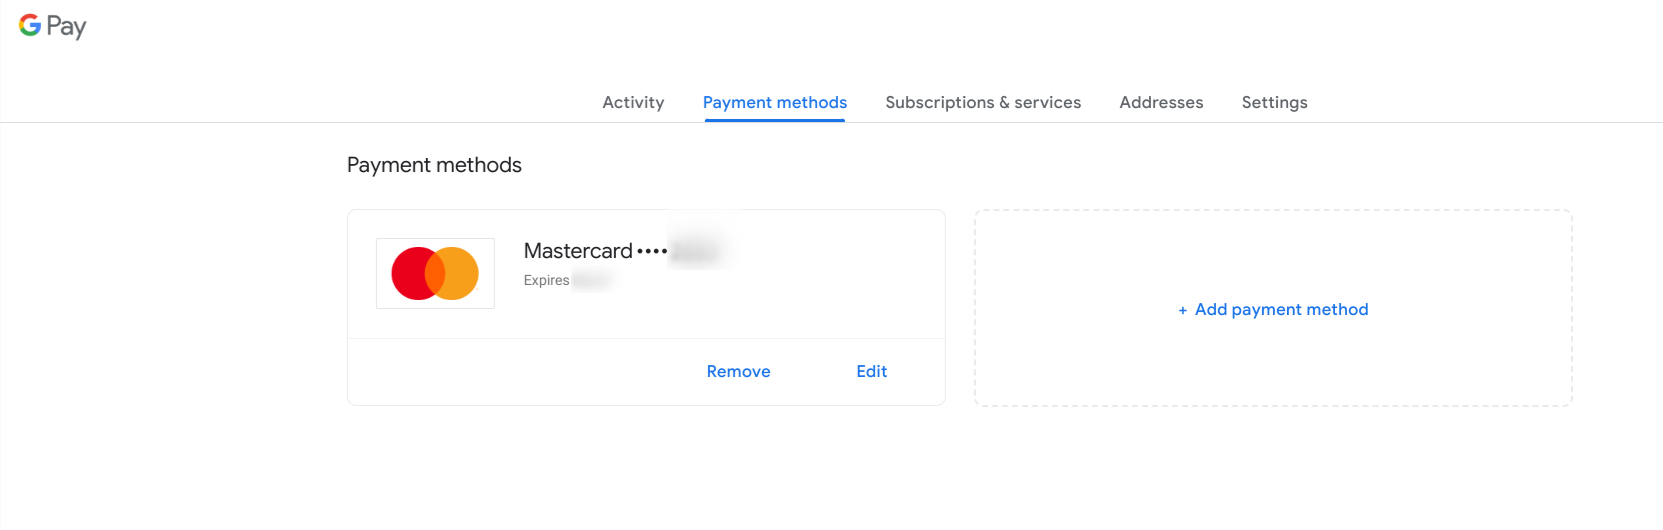 Card added to Google Pay